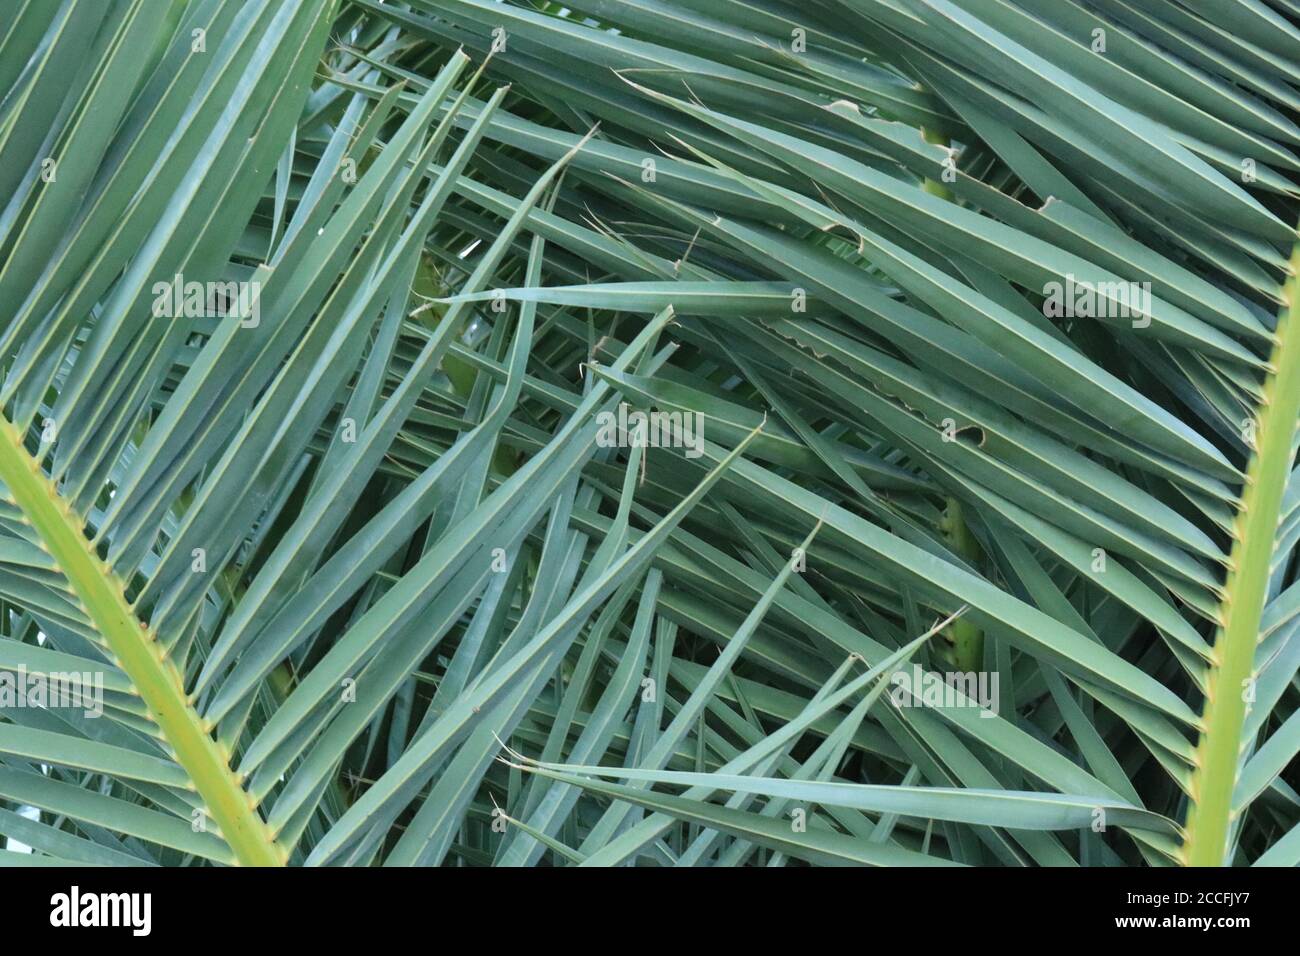 Saw palmetto (Serena repens) with fan-shaped leaves that have sharply toothed stalks Stock Photo